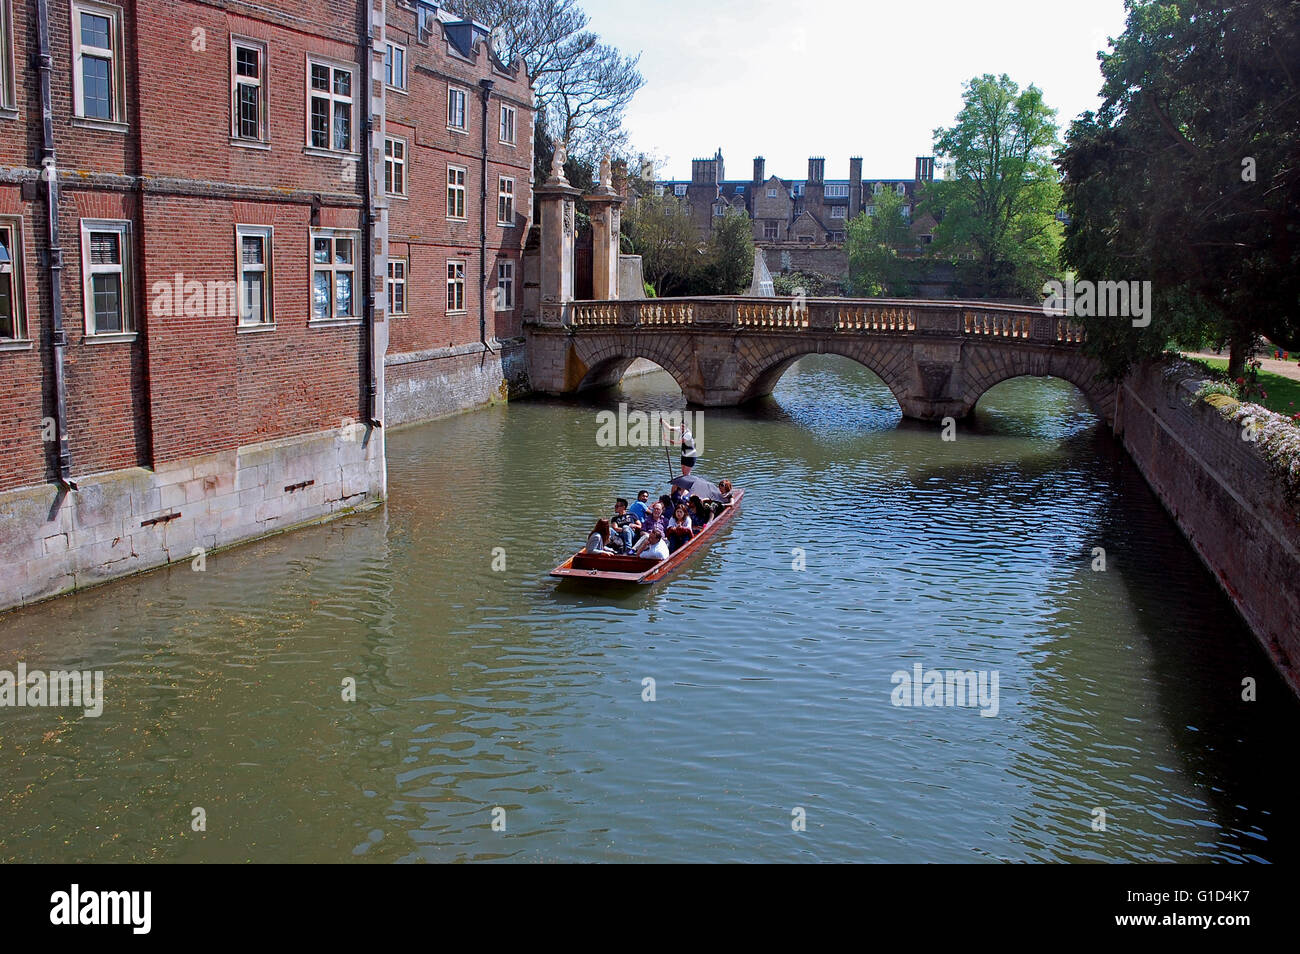 Punts on the river Cambs at St John's College as seen from the Bridge of Sighs Stock Photo